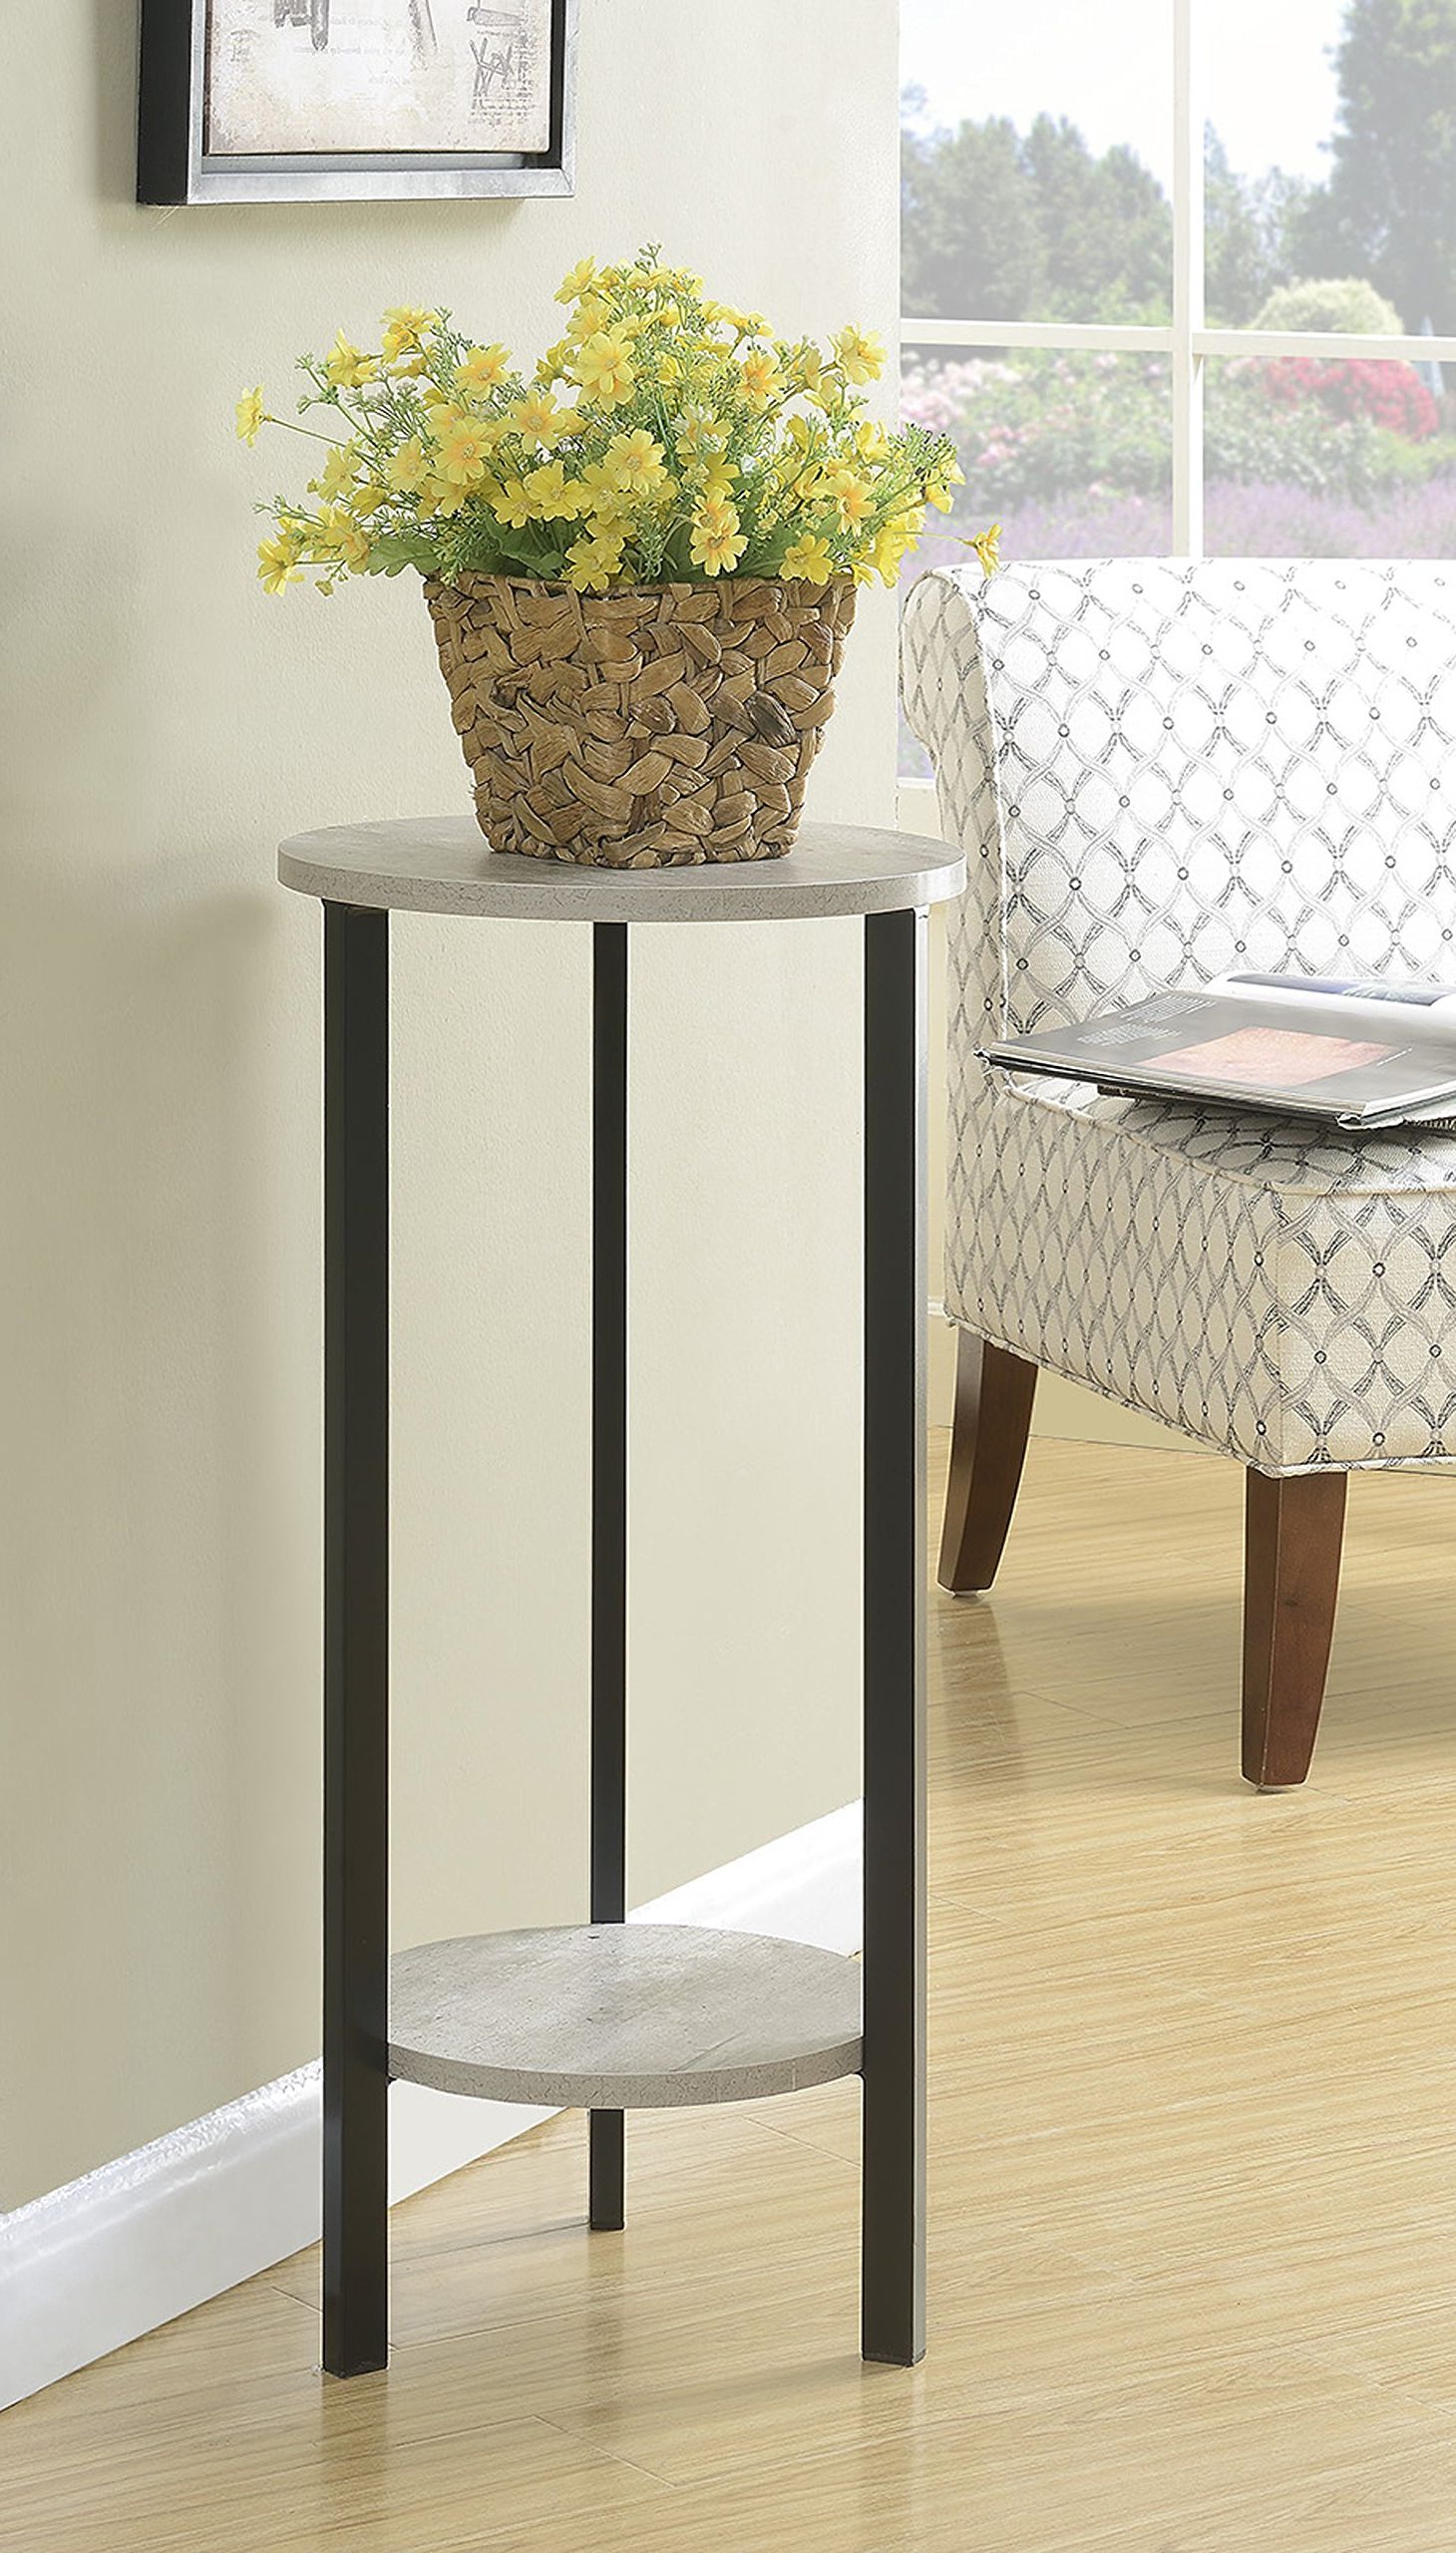 Greystone Plant Stands Regarding Favorite Amazon: Convenience Concepts Graystone 31" Plant Stand, Faux Birch /  Black : Home & Kitchen (View 10 of 10)